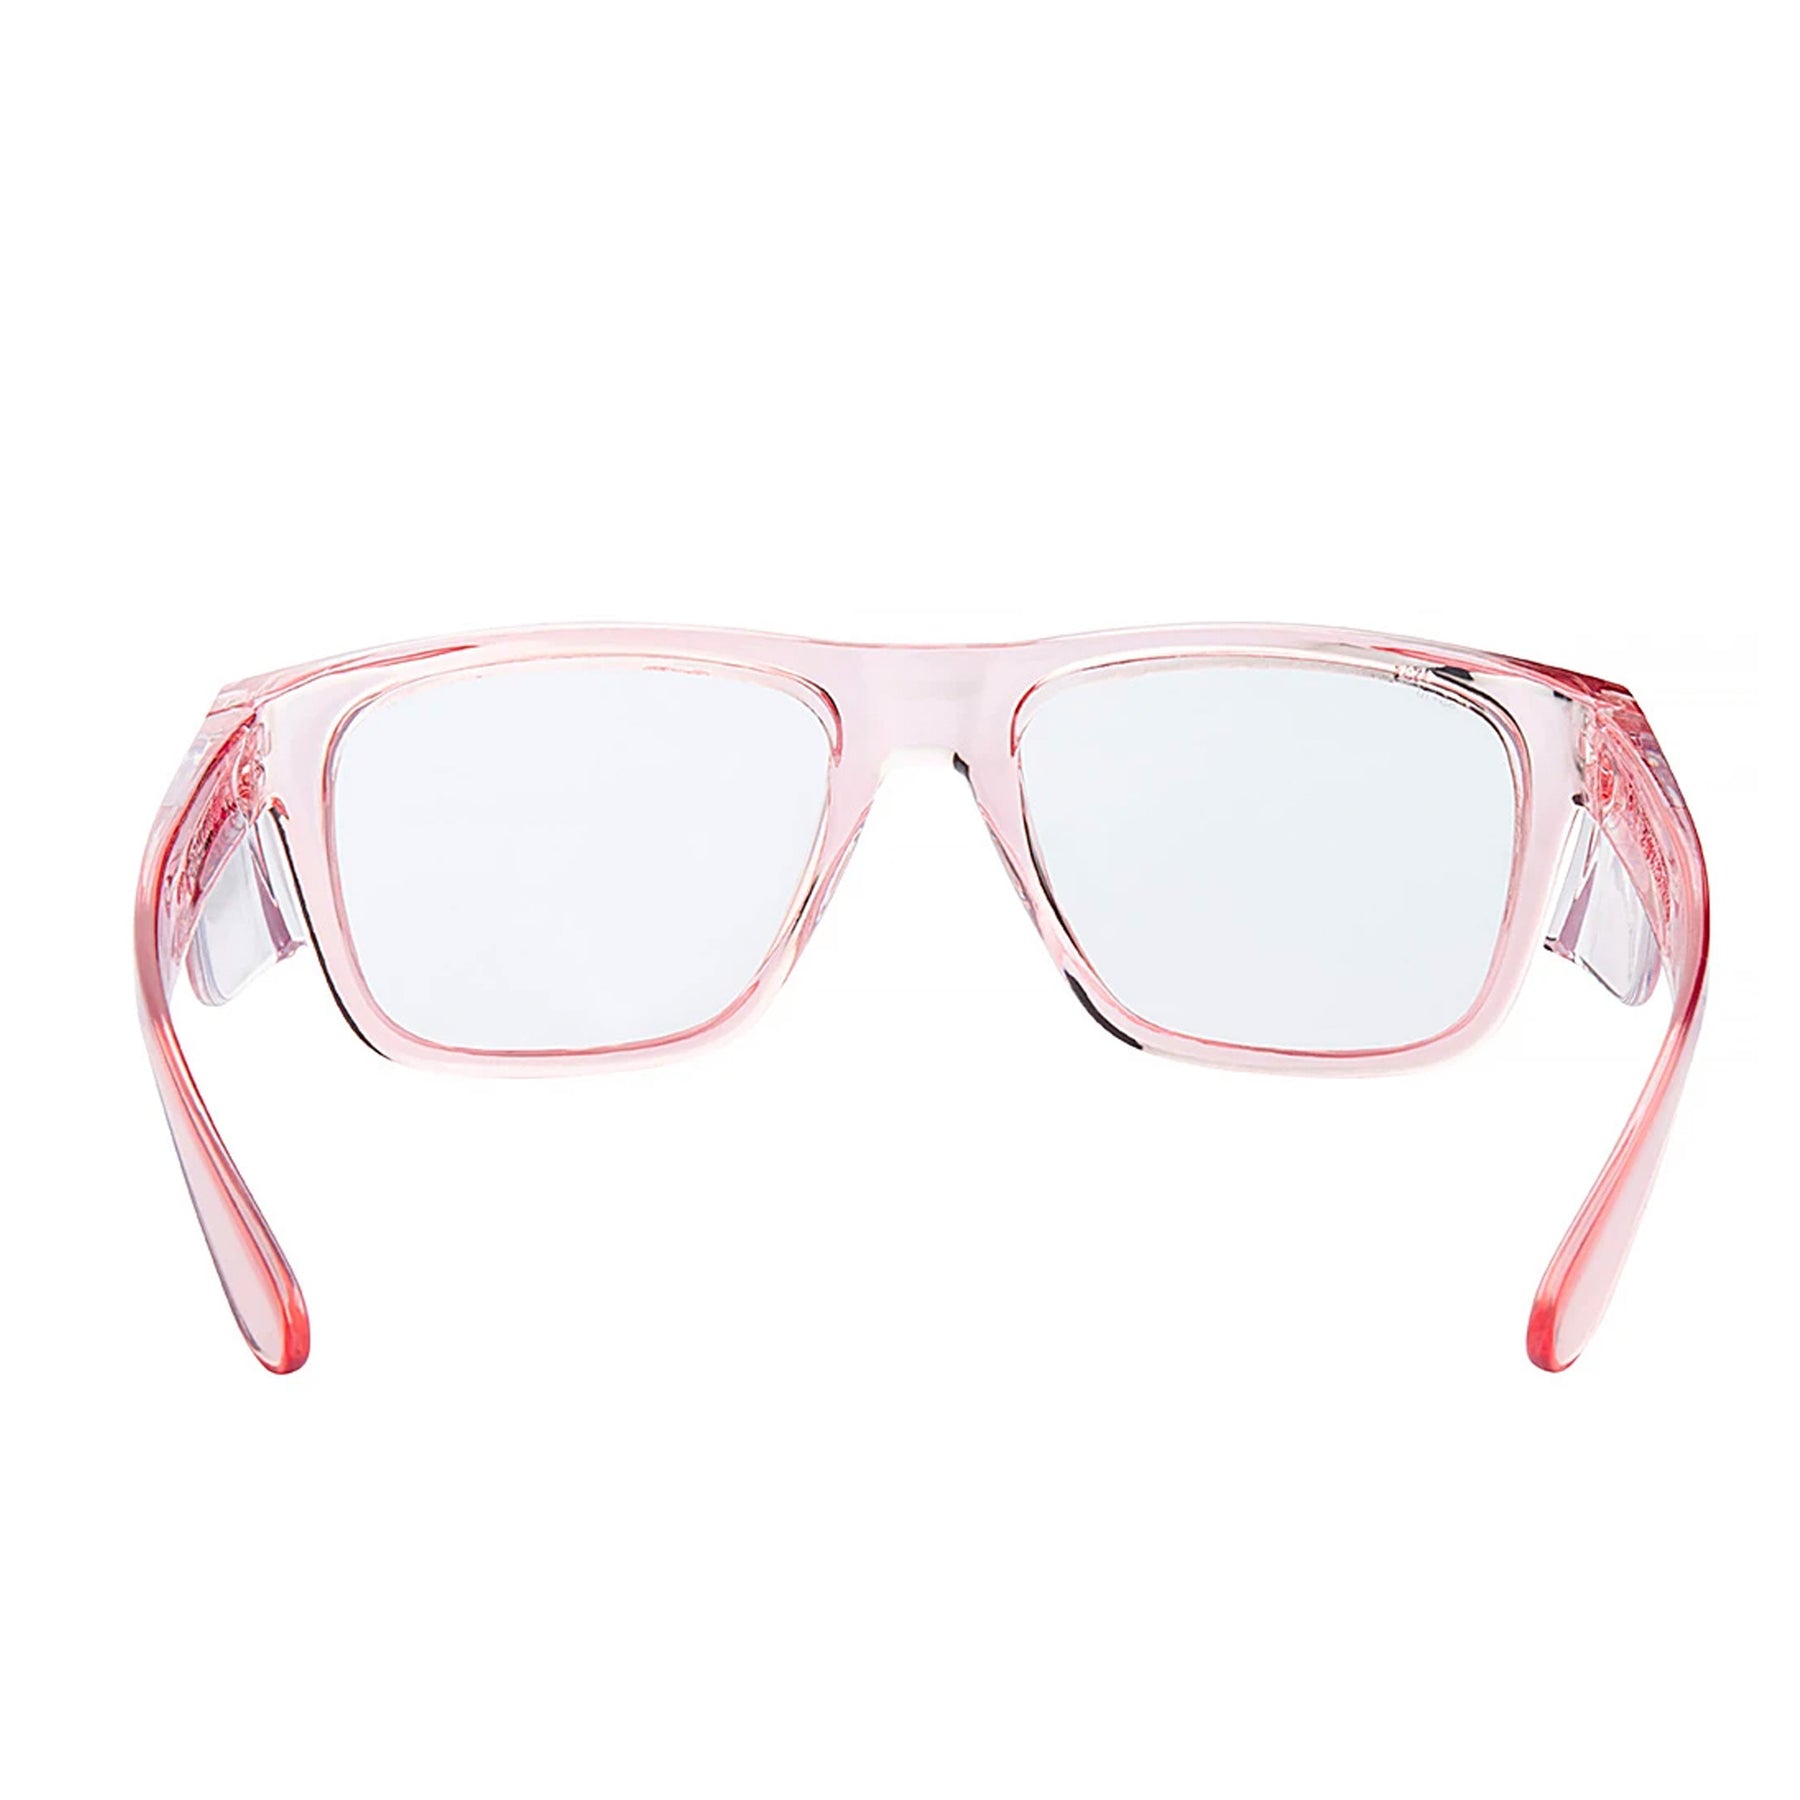 safestyle fusions pink frame with clear uv400 lens